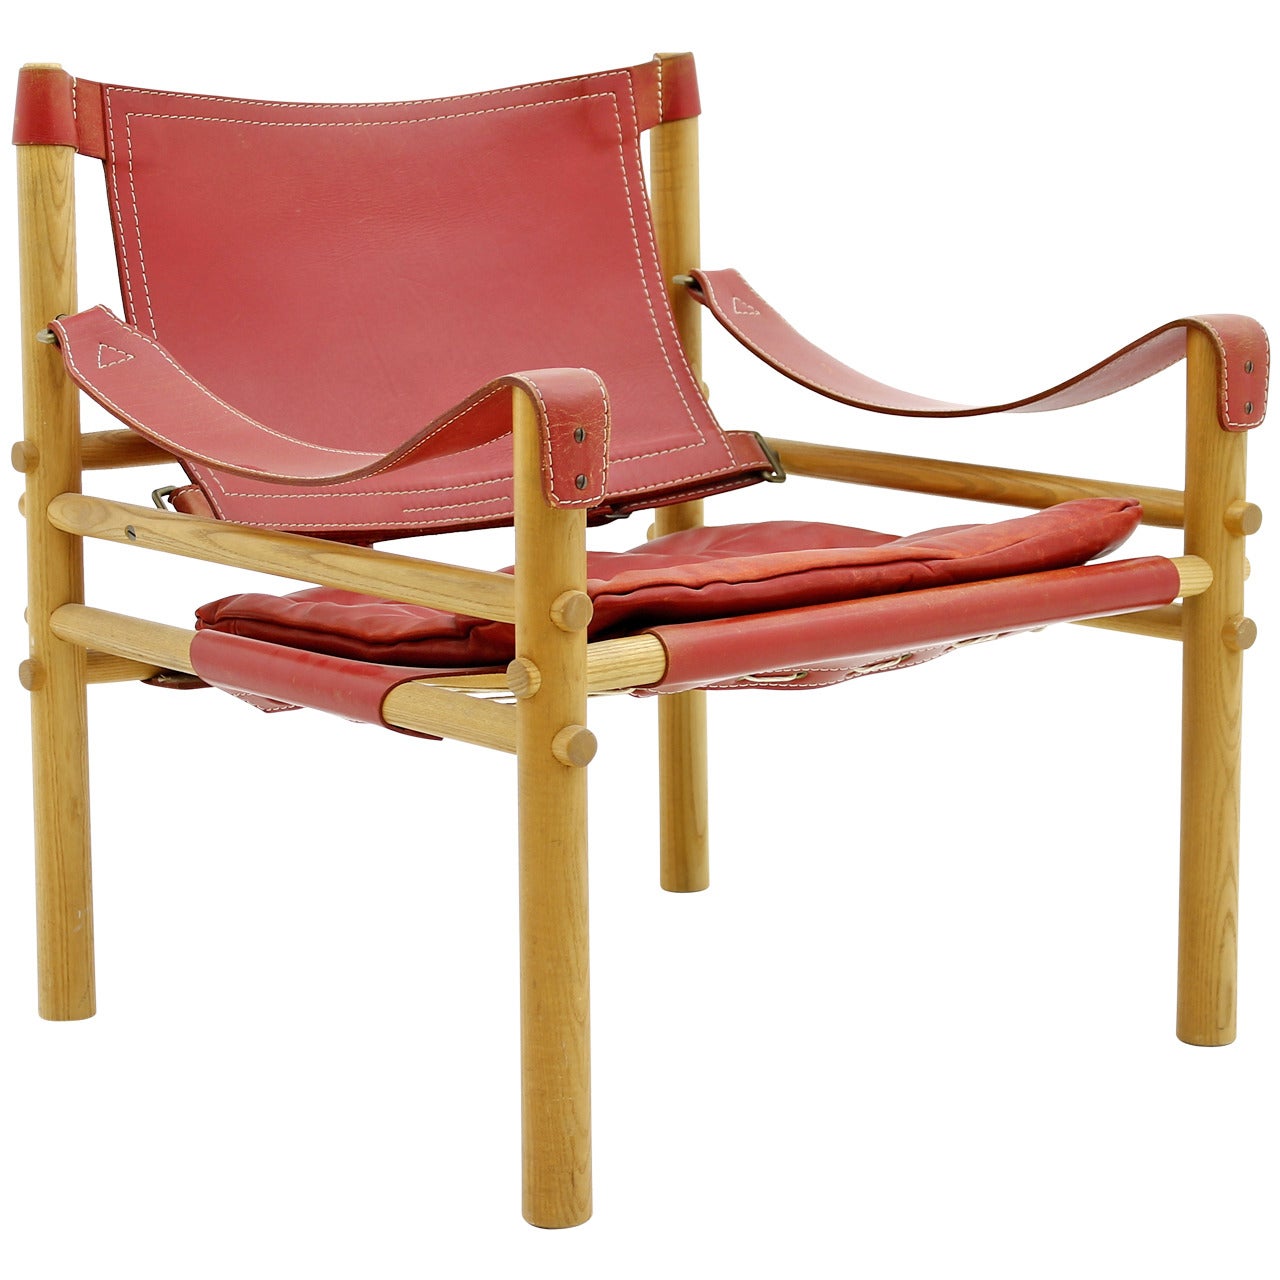 Arne Norell Safari Lounge Chair in Red Leather, Sweden, 1960s